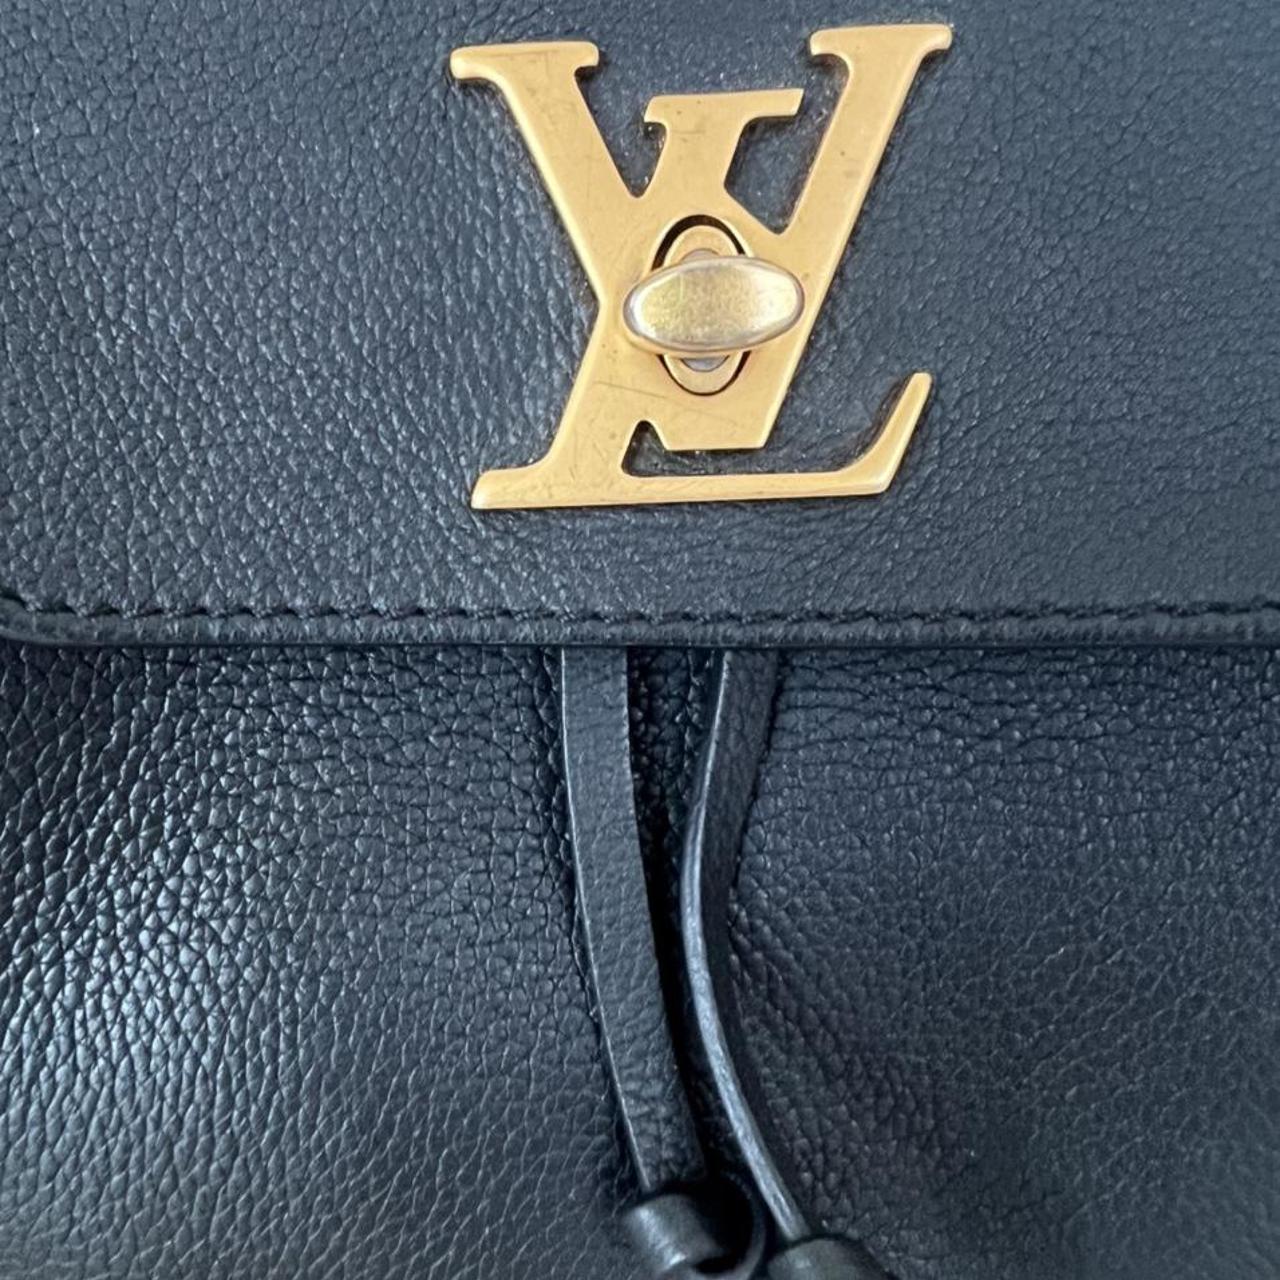 Lockme leather backpack Louis Vuitton Black in Leather - 22453633